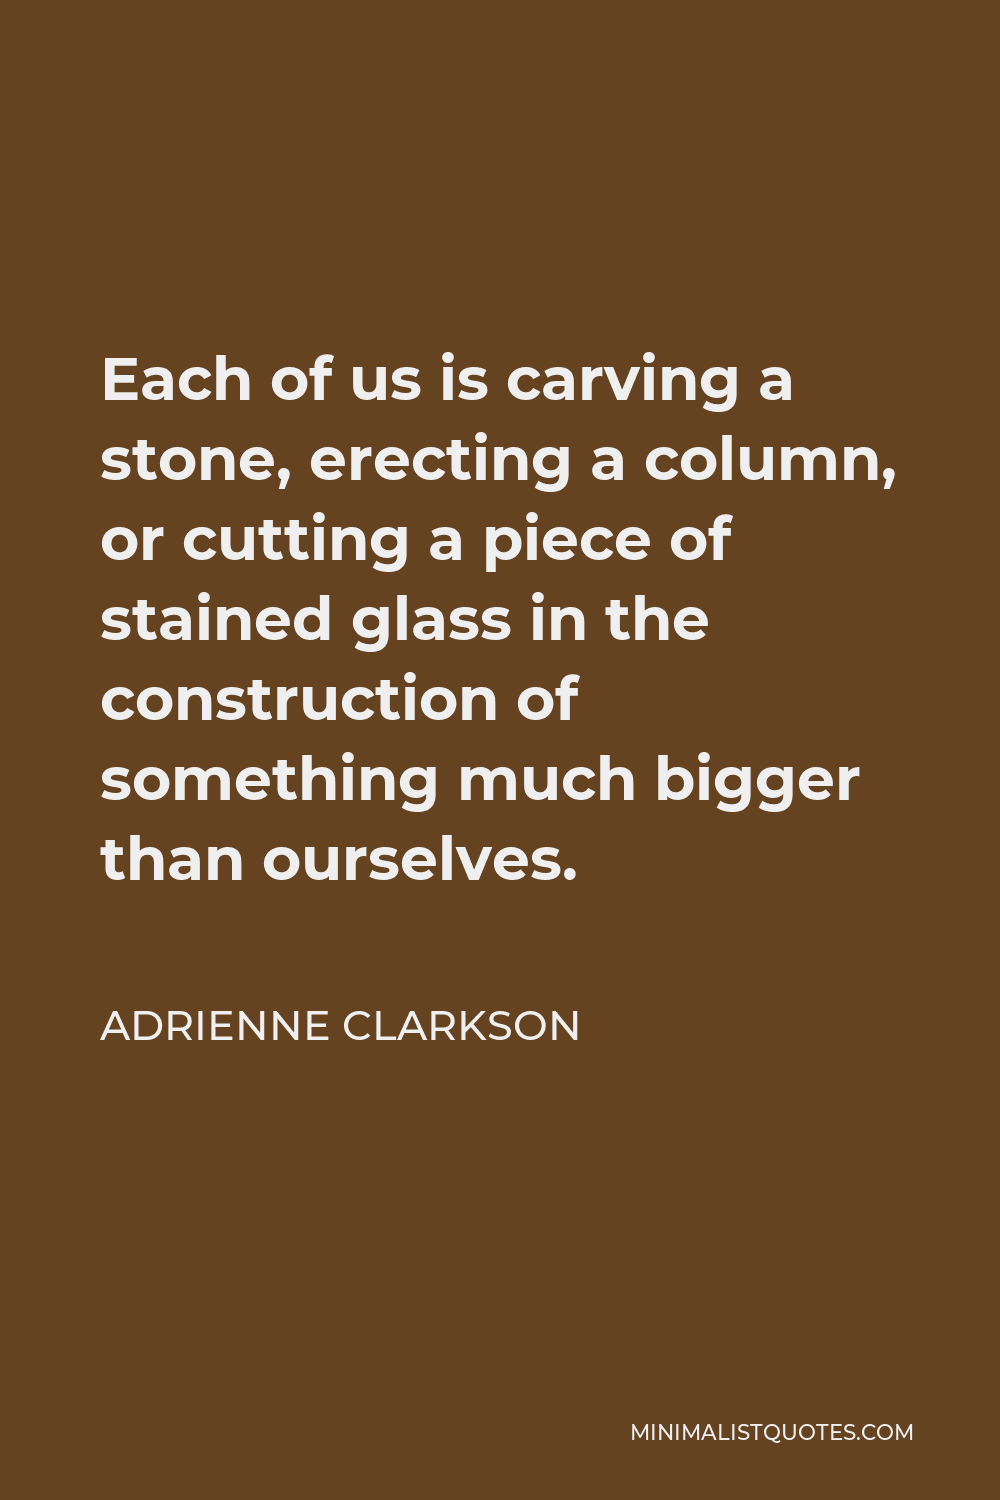 Adrienne Clarkson Quote - Each of us is carving a stone, erecting a column, or cutting a piece of stained glass in the construction of something much bigger than ourselves.